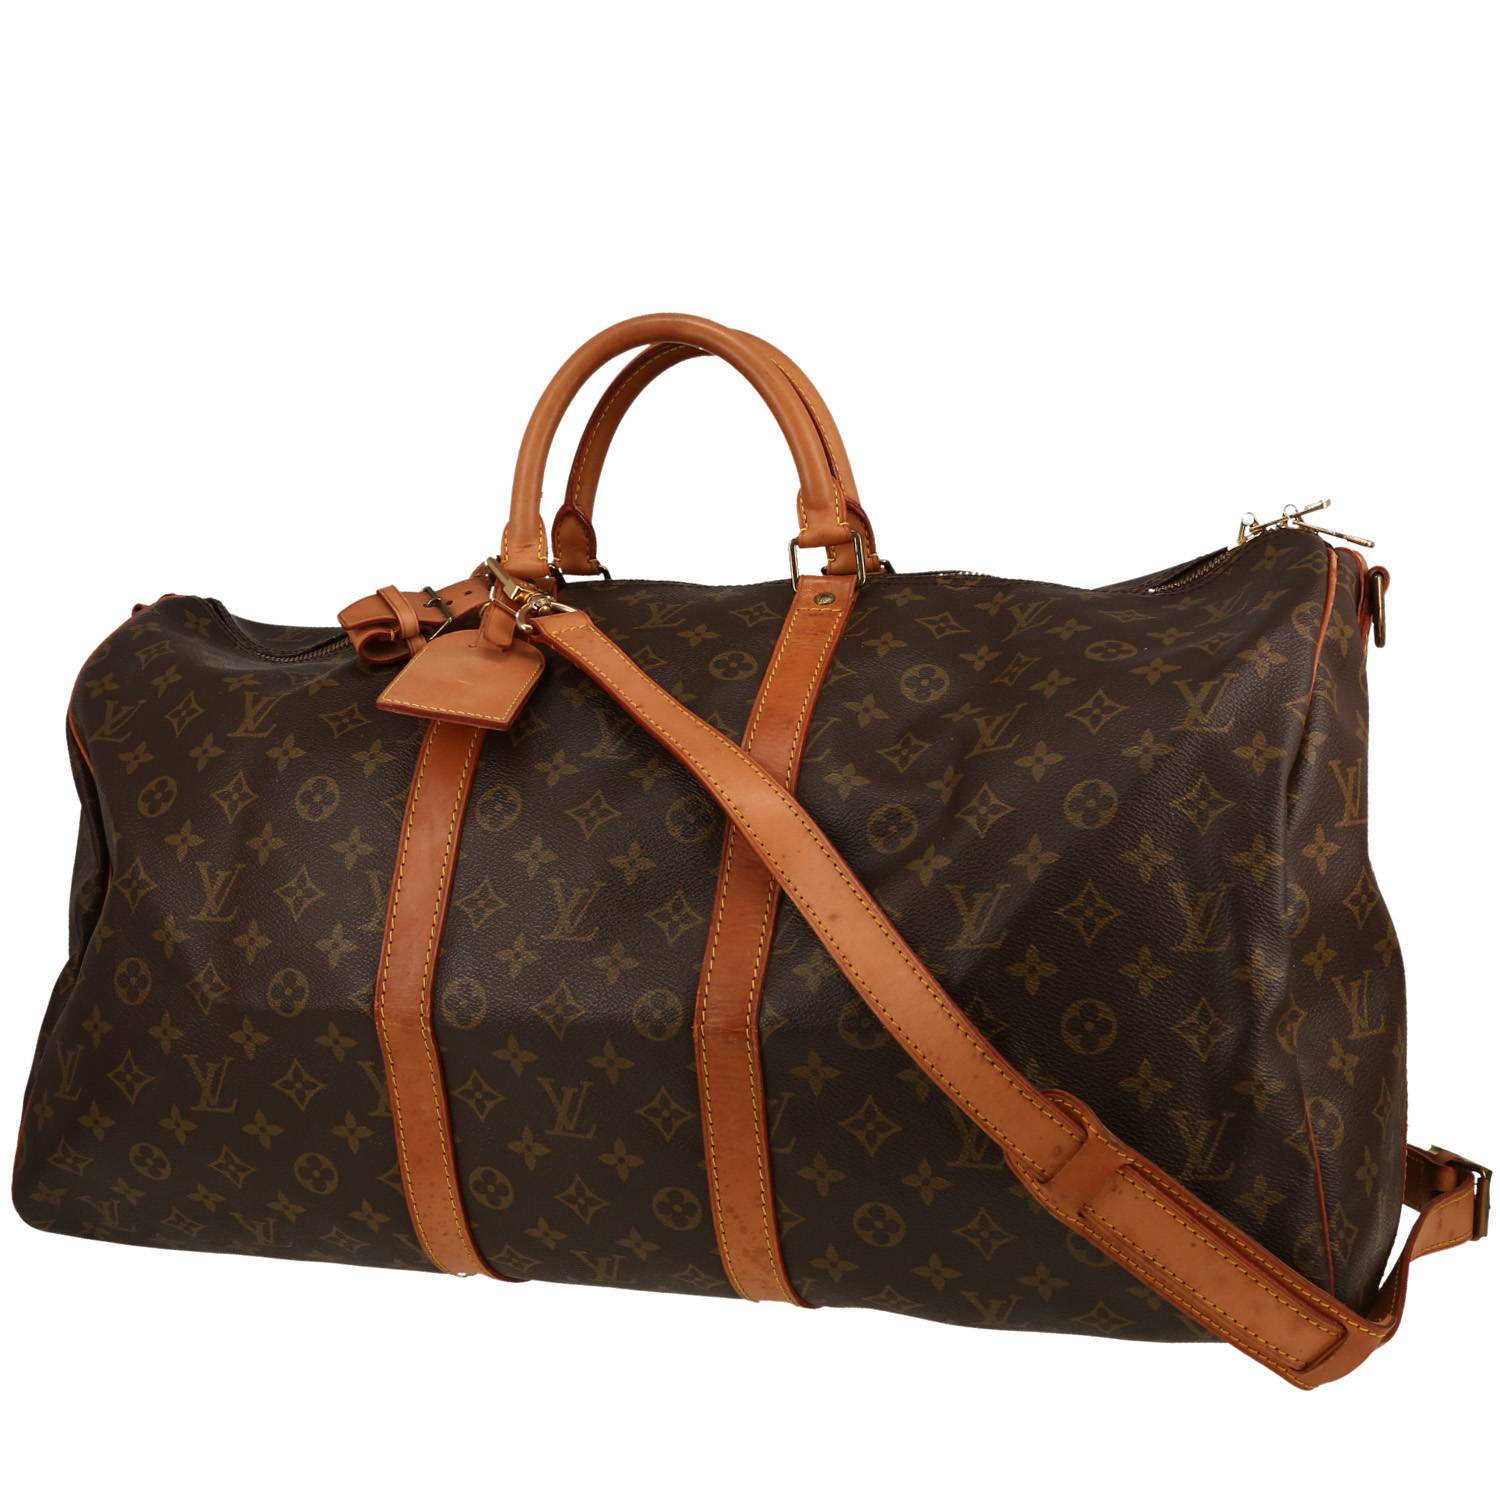 Keepall 55 Travel Bag In Brown Monogram Canvas And